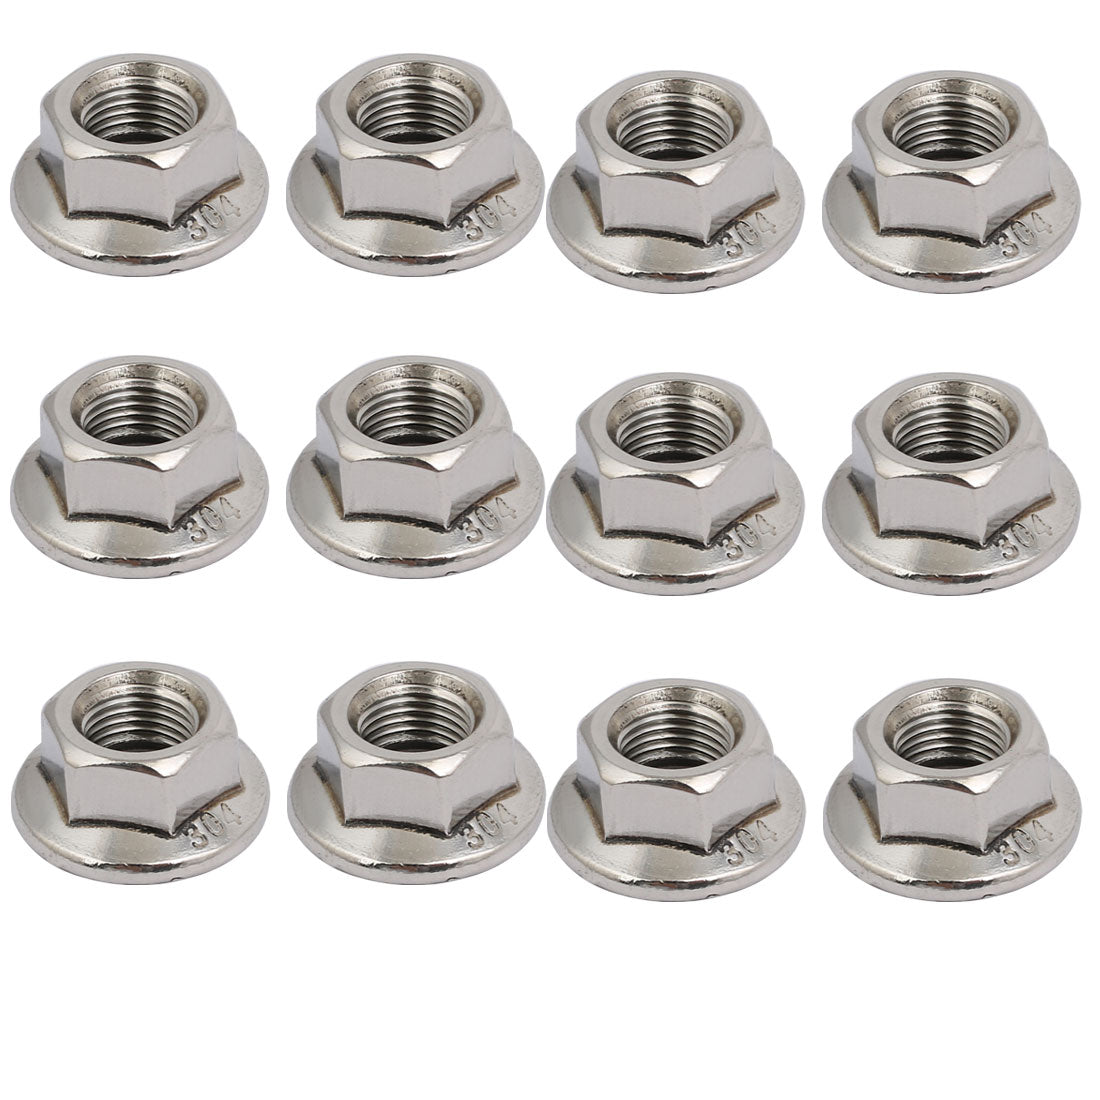 uxcell Uxcell 12pcs M10 x 1.25mm Pitch Metric Fine Thread 304 Stainless Steel Hex Flange Nut